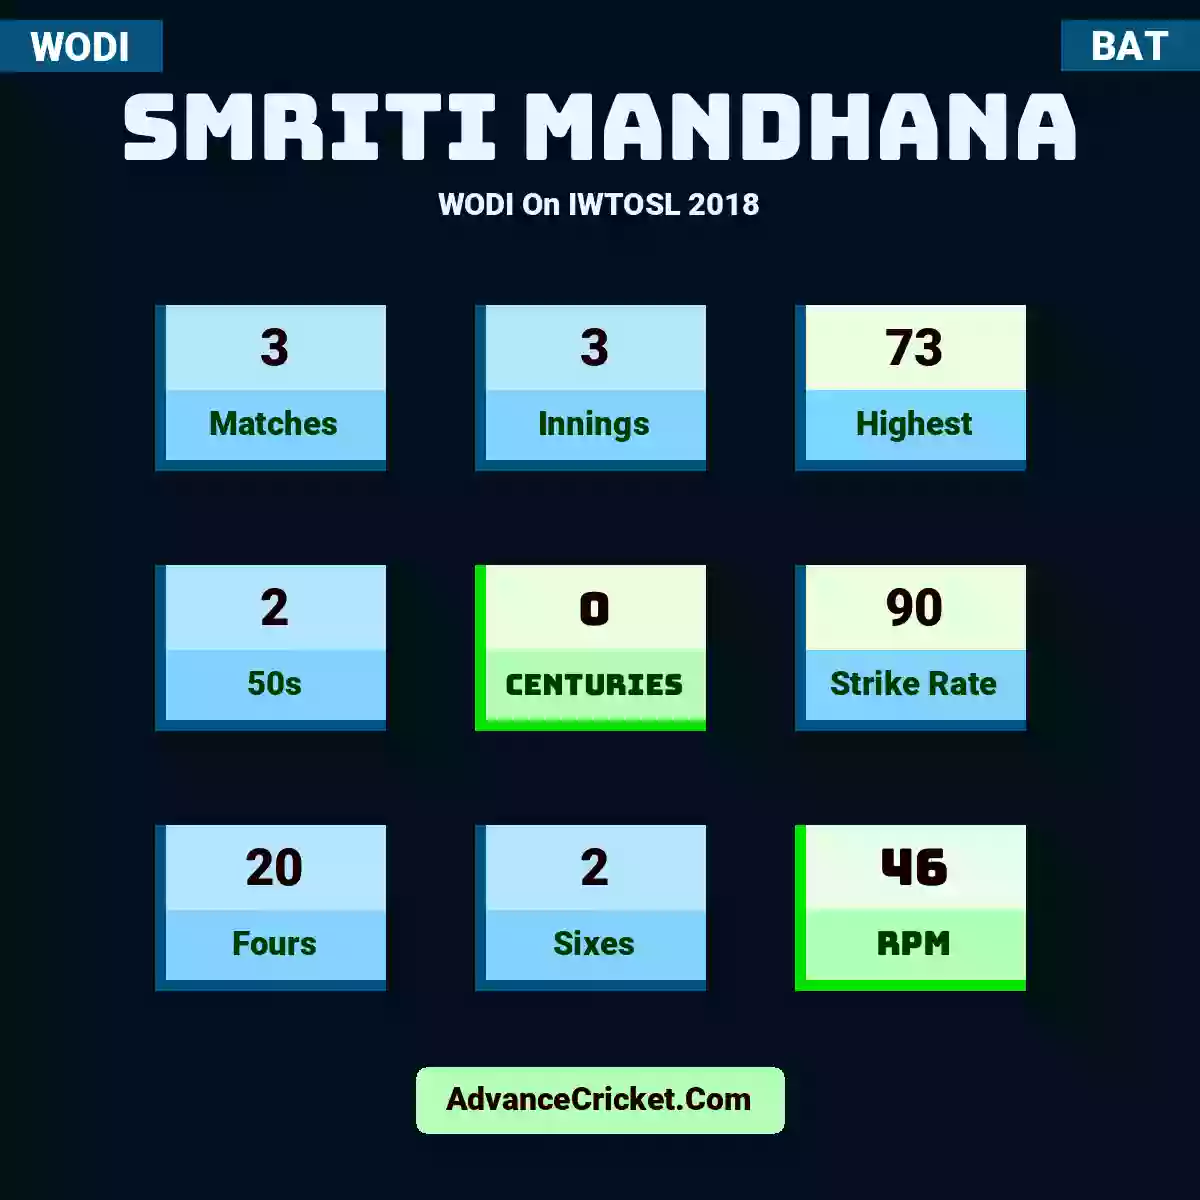 Smriti Mandhana WODI  On IWTOSL 2018, Smriti Mandhana played 3 matches, scored 73 runs as highest, 2 half-centuries, and 0 centuries, with a strike rate of 90. S.Mandhana hit 20 fours and 2 sixes, with an RPM of 46.